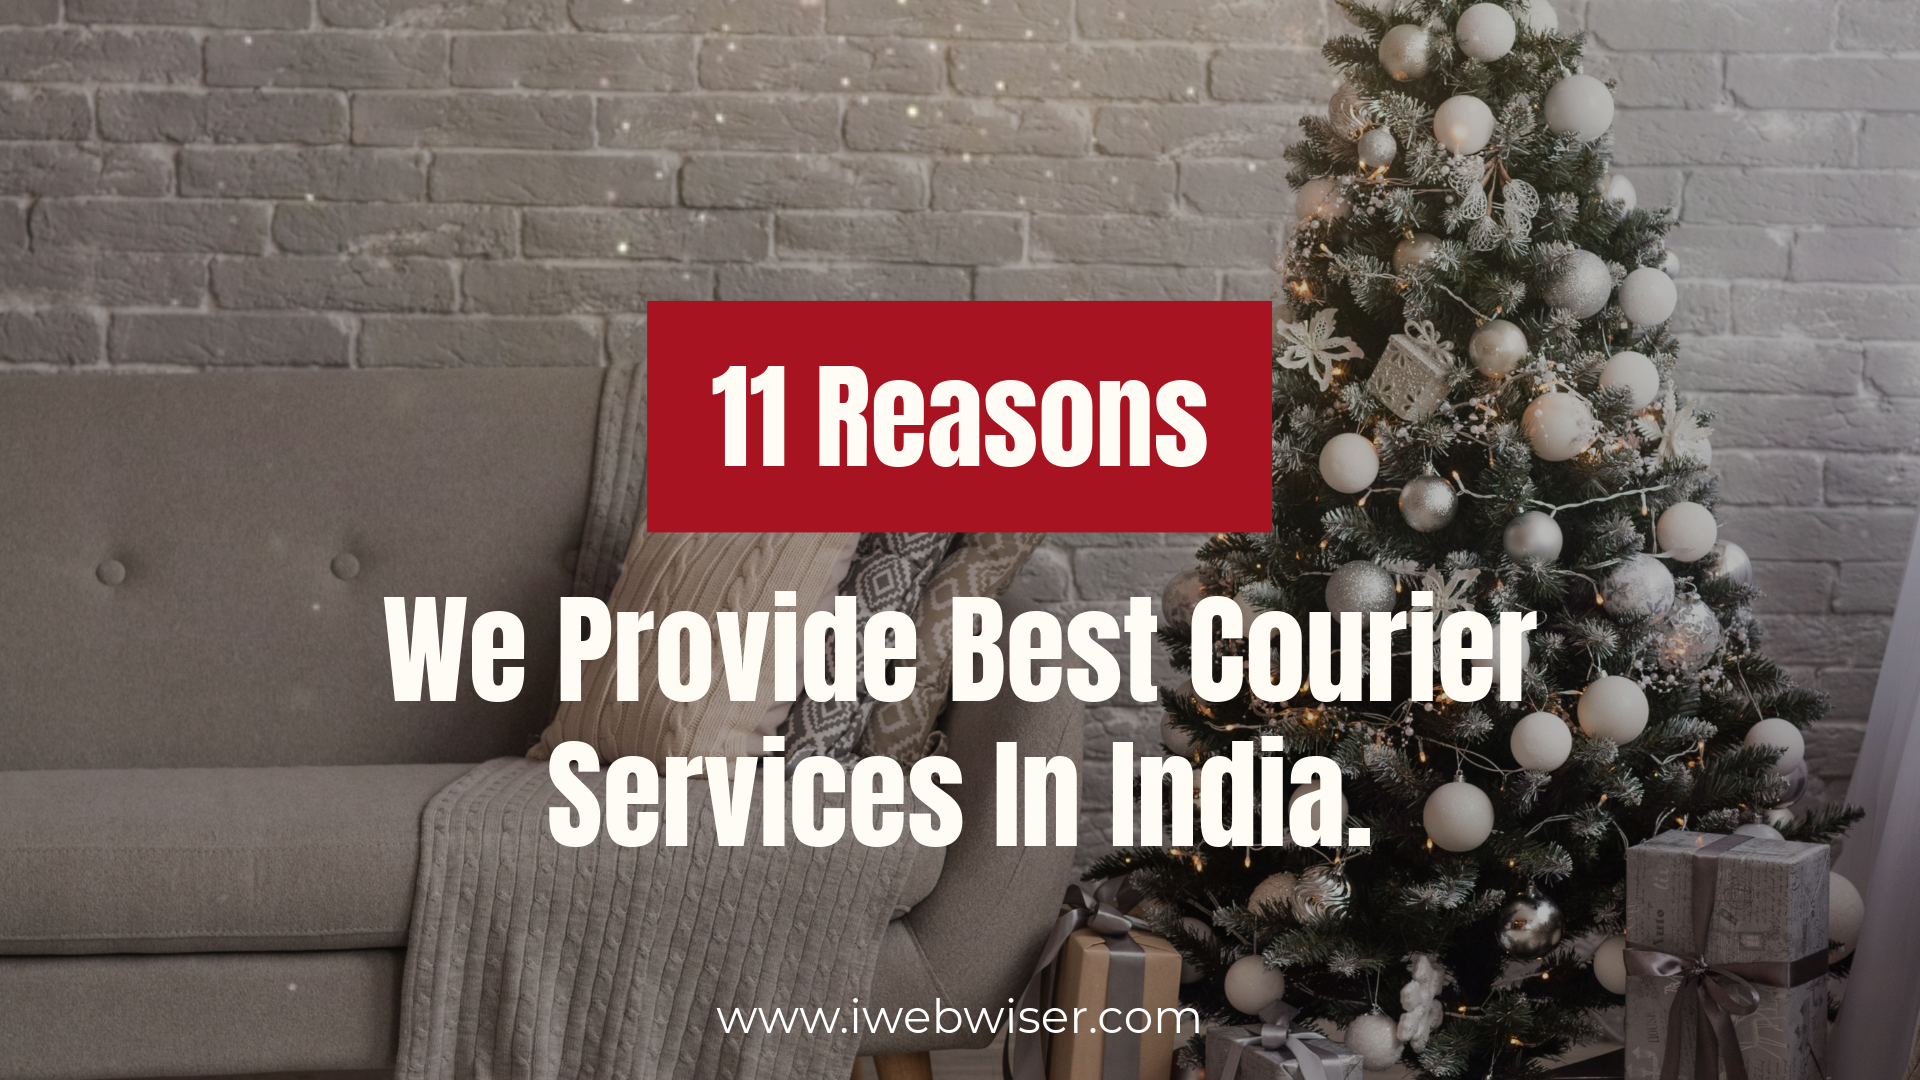 11-reasons-fast-express-provide-best-courier-services-in-India
